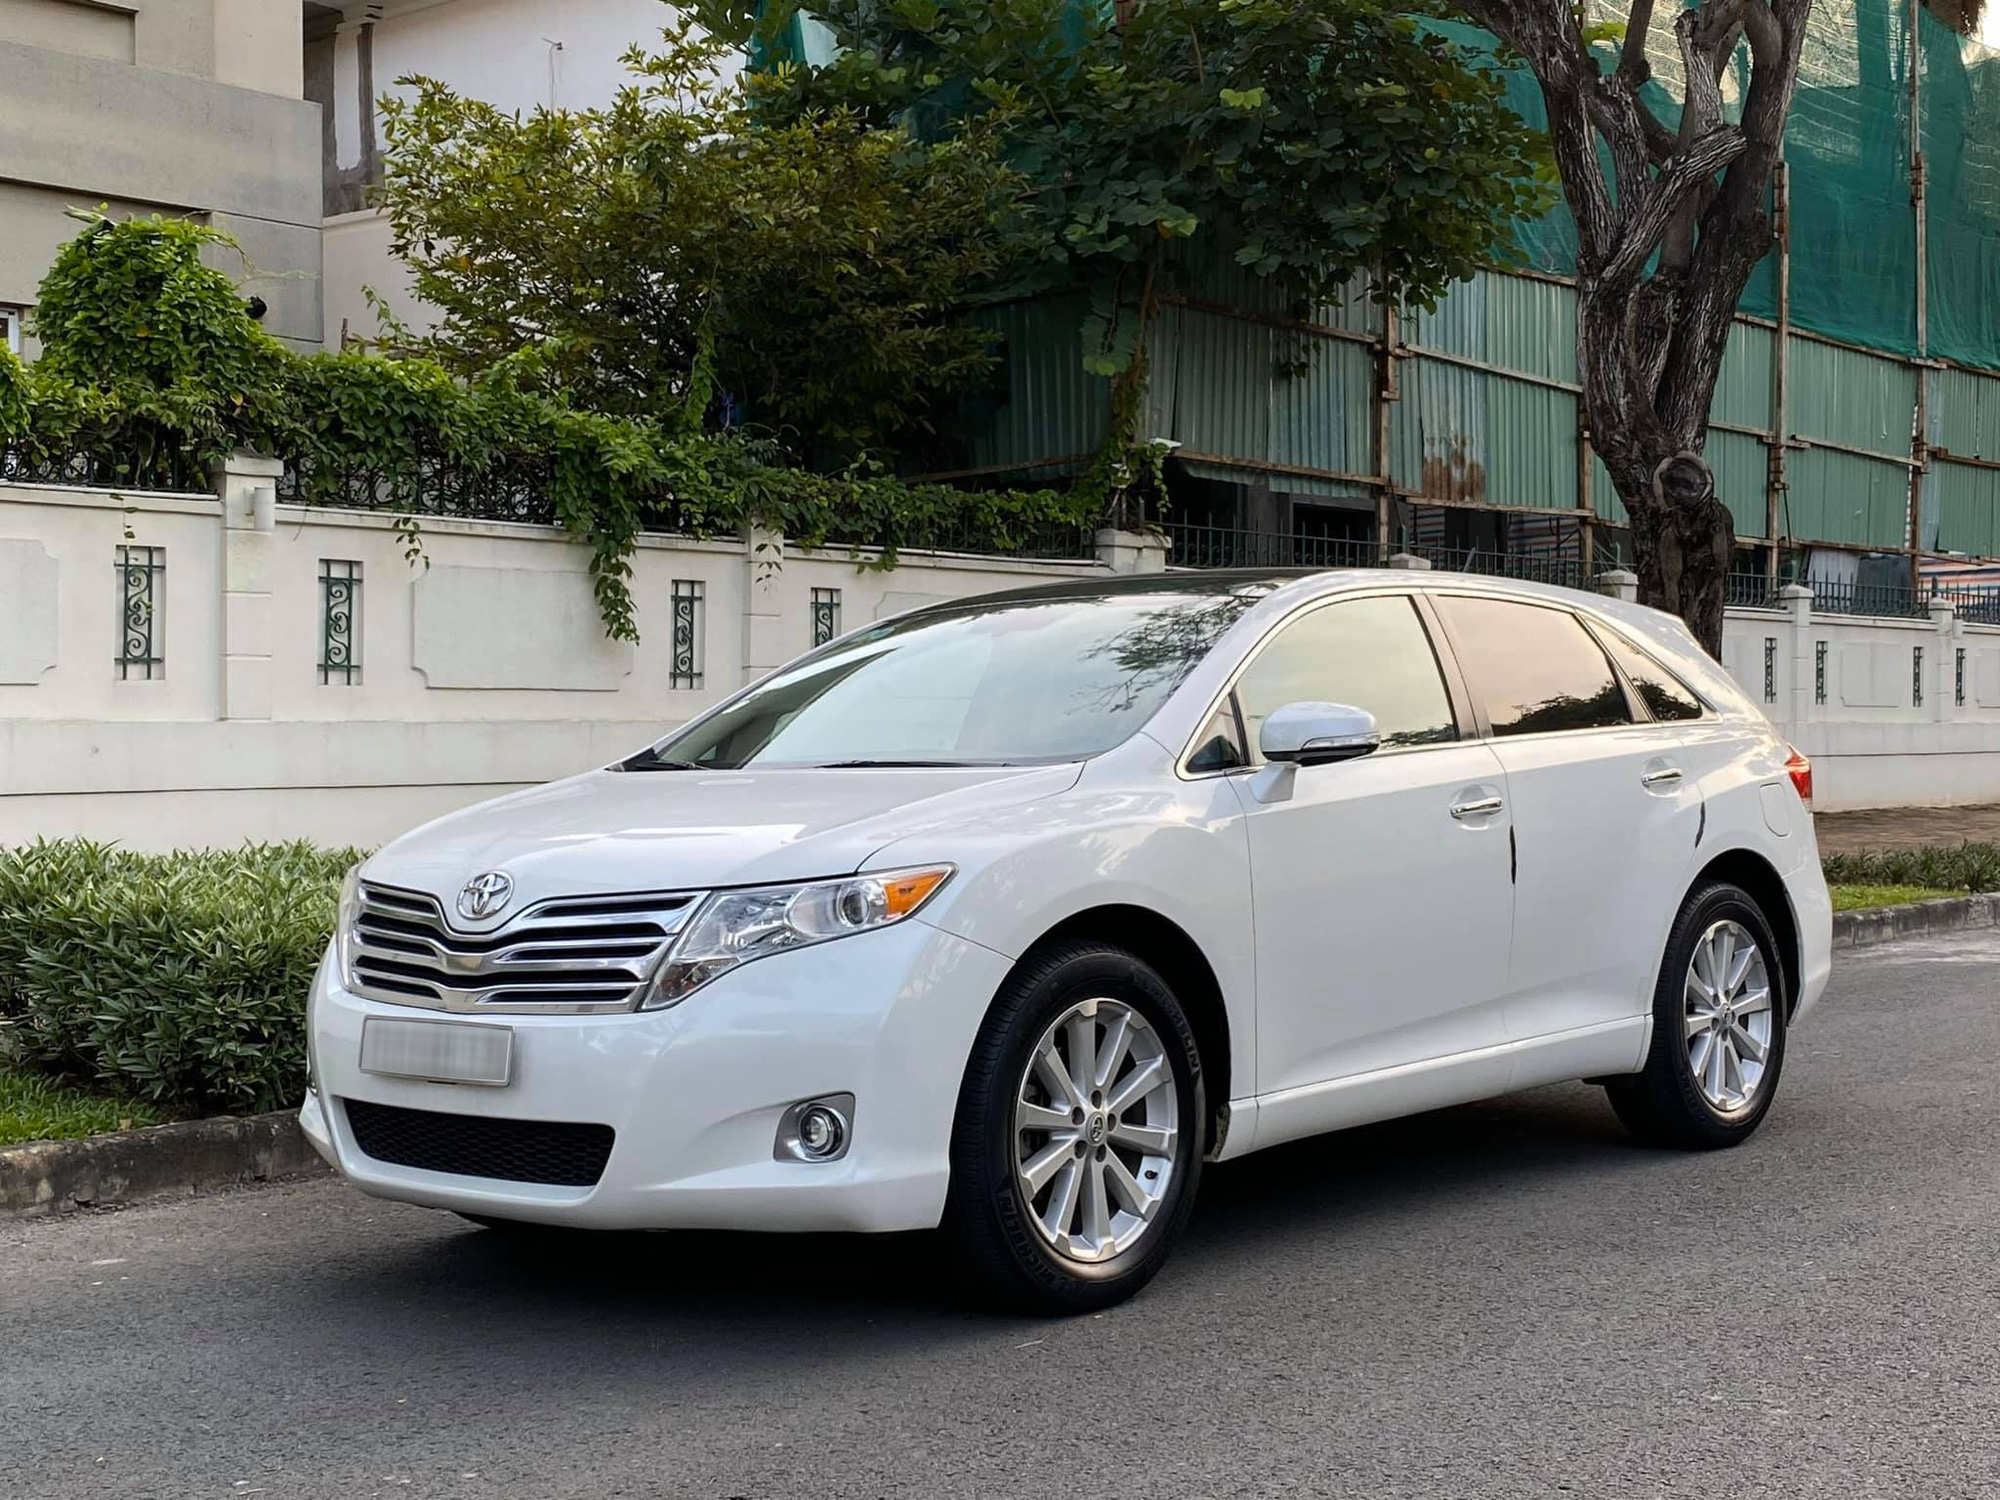 Used 2010 Toyota Venza for Sale in New Haven CT  Edmunds